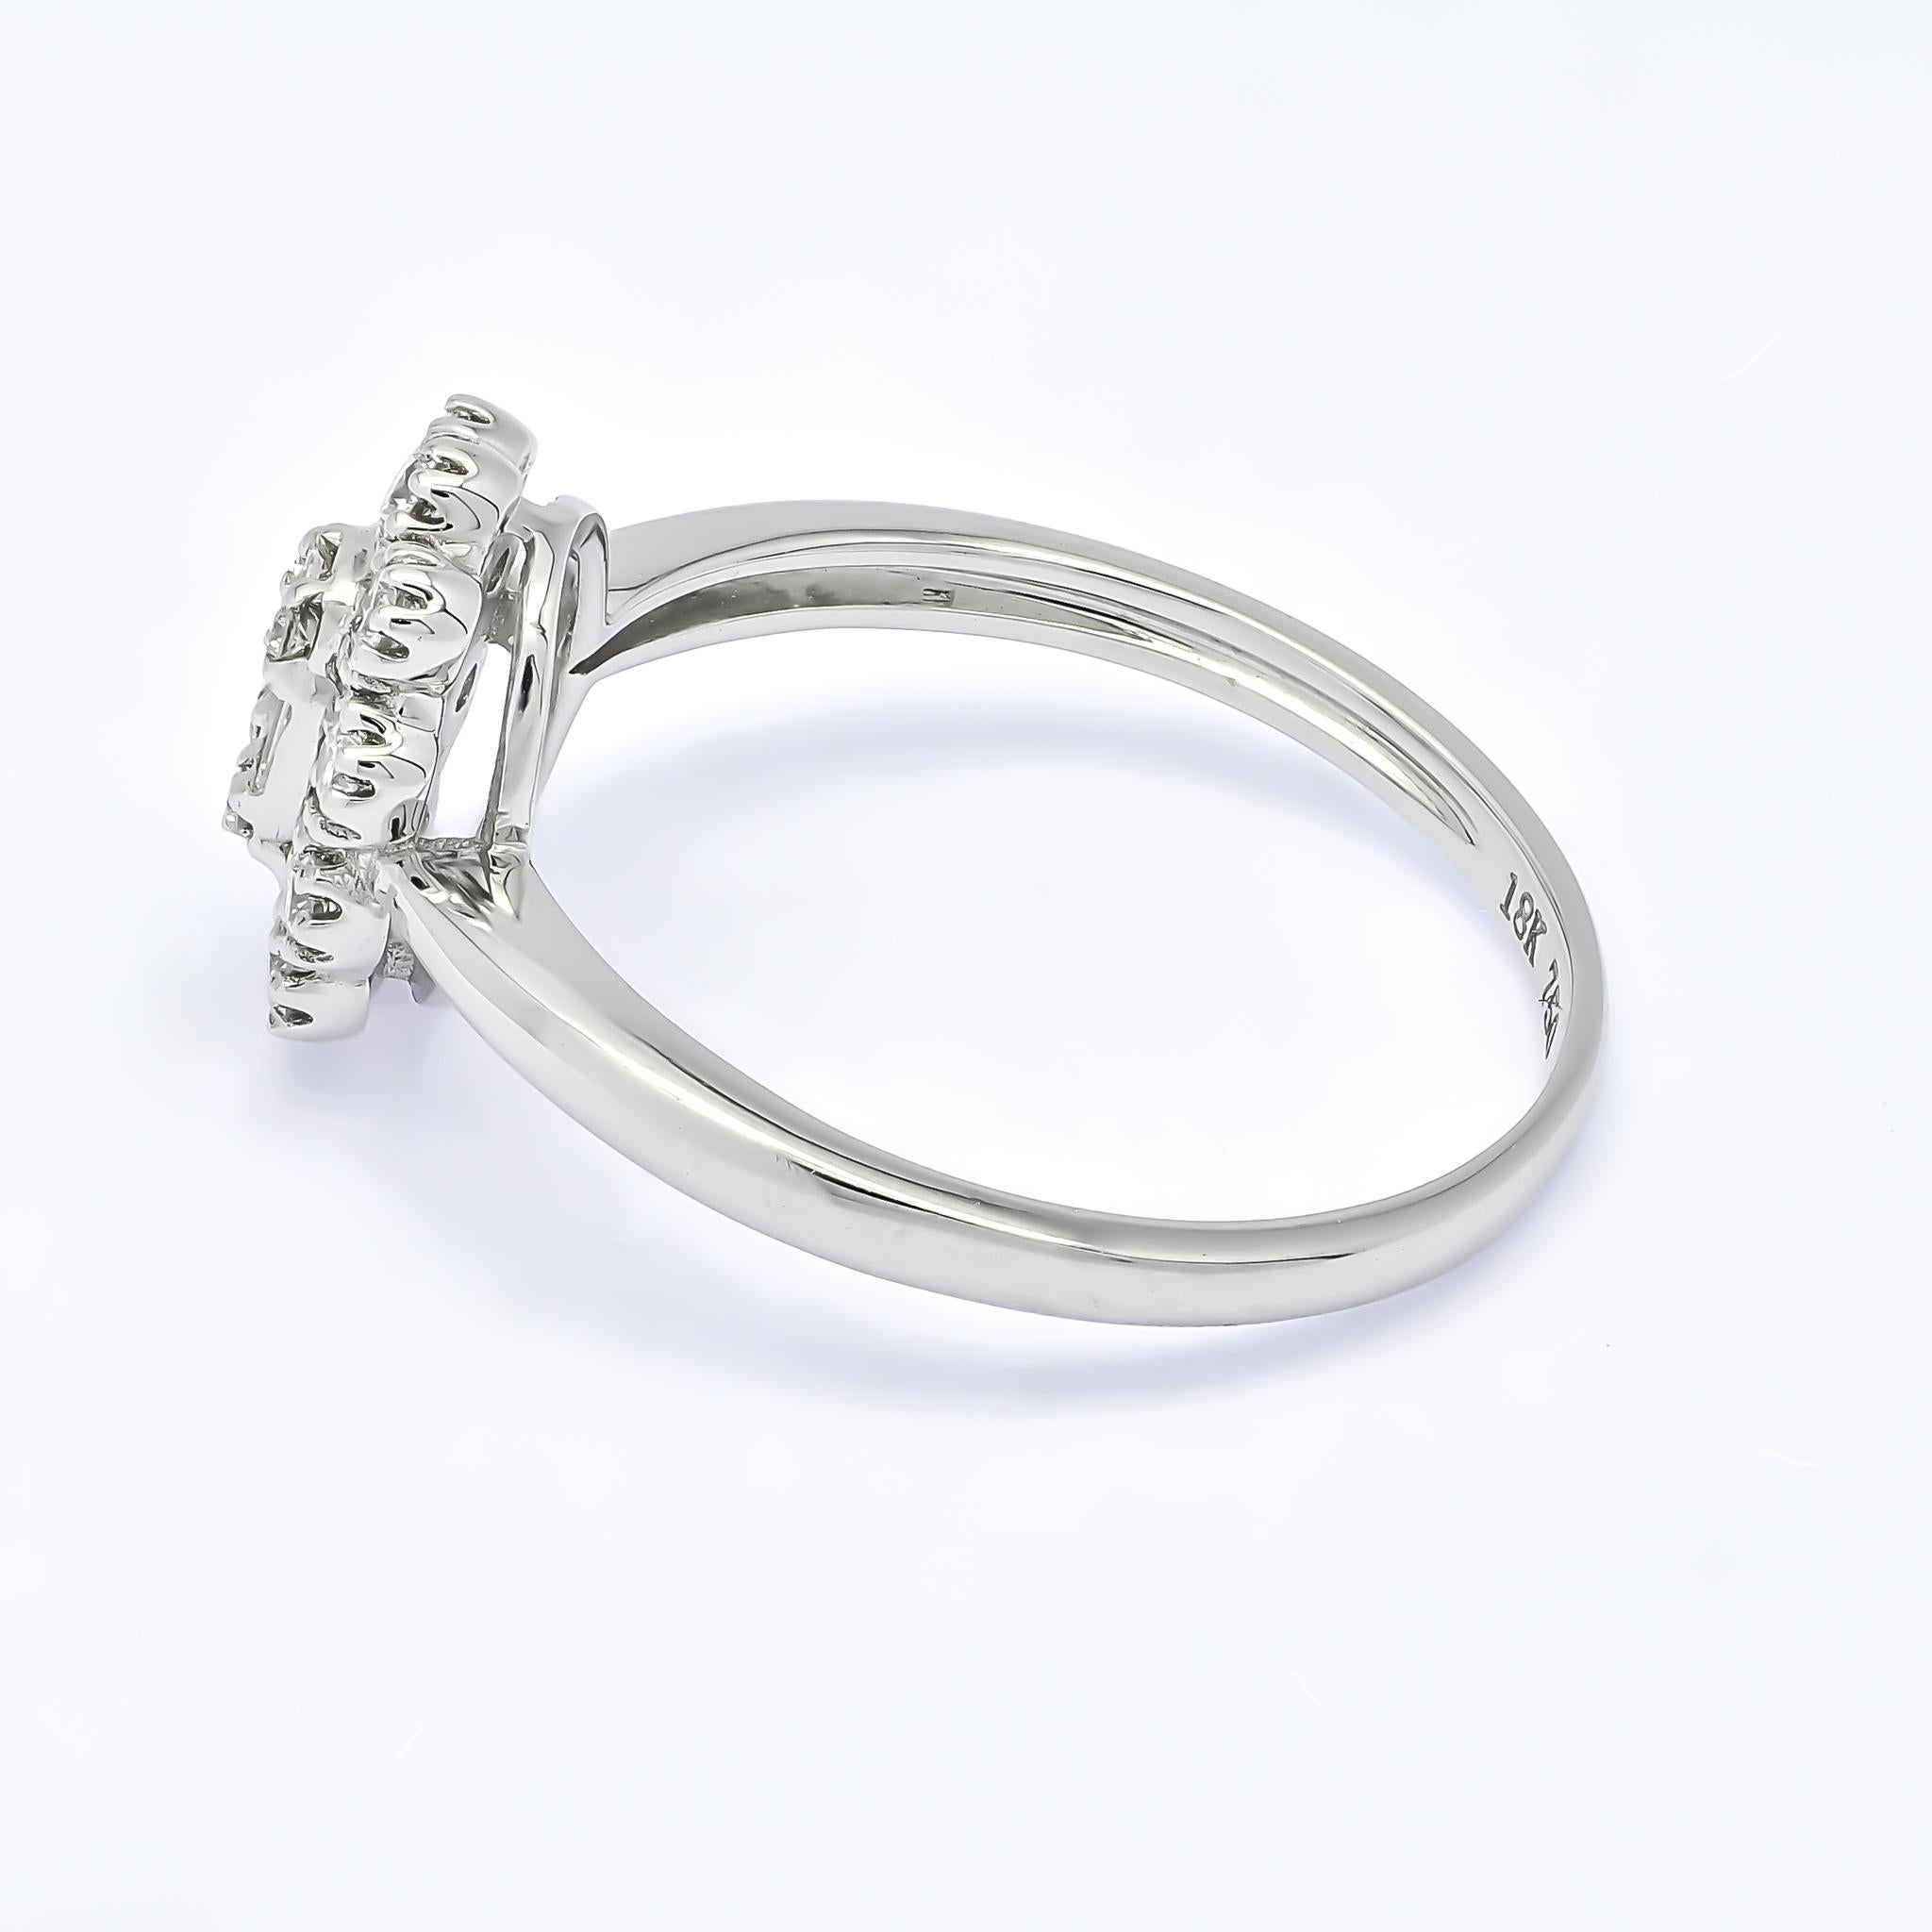 This muted vintage engagement ring features a oval shape cluster of baguettes set in the center with prong set round diamonds along the outer halo in a glamorous Victorian style engagement ring. 

A vintage cluster diamond ring is a beautiful and